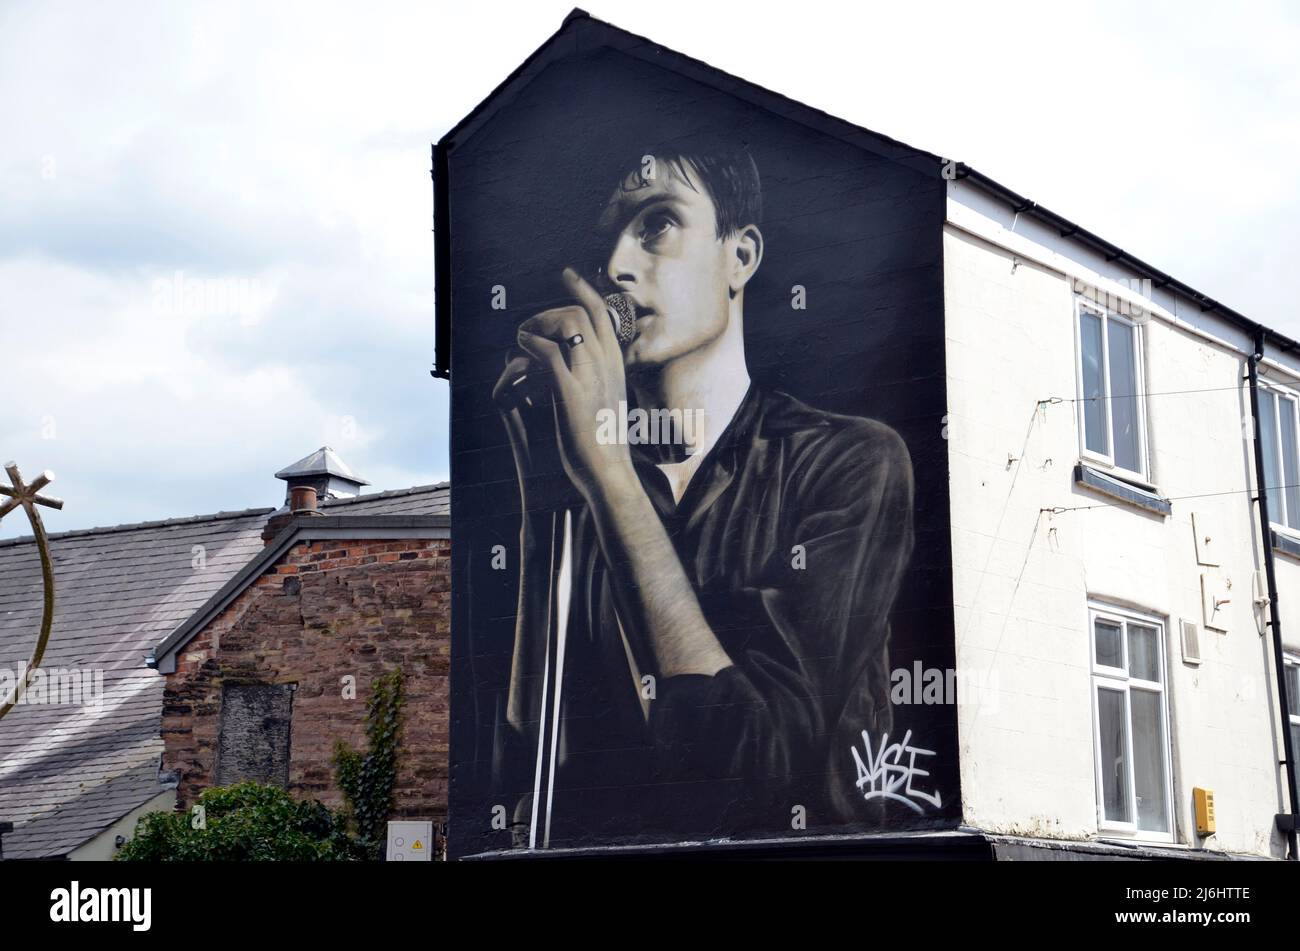 A mural in Macclesfield by street artist Akse in tribute to Ian Curtis, lead singer of Joy Division, who was born in the Cheshire town. Stock Photo